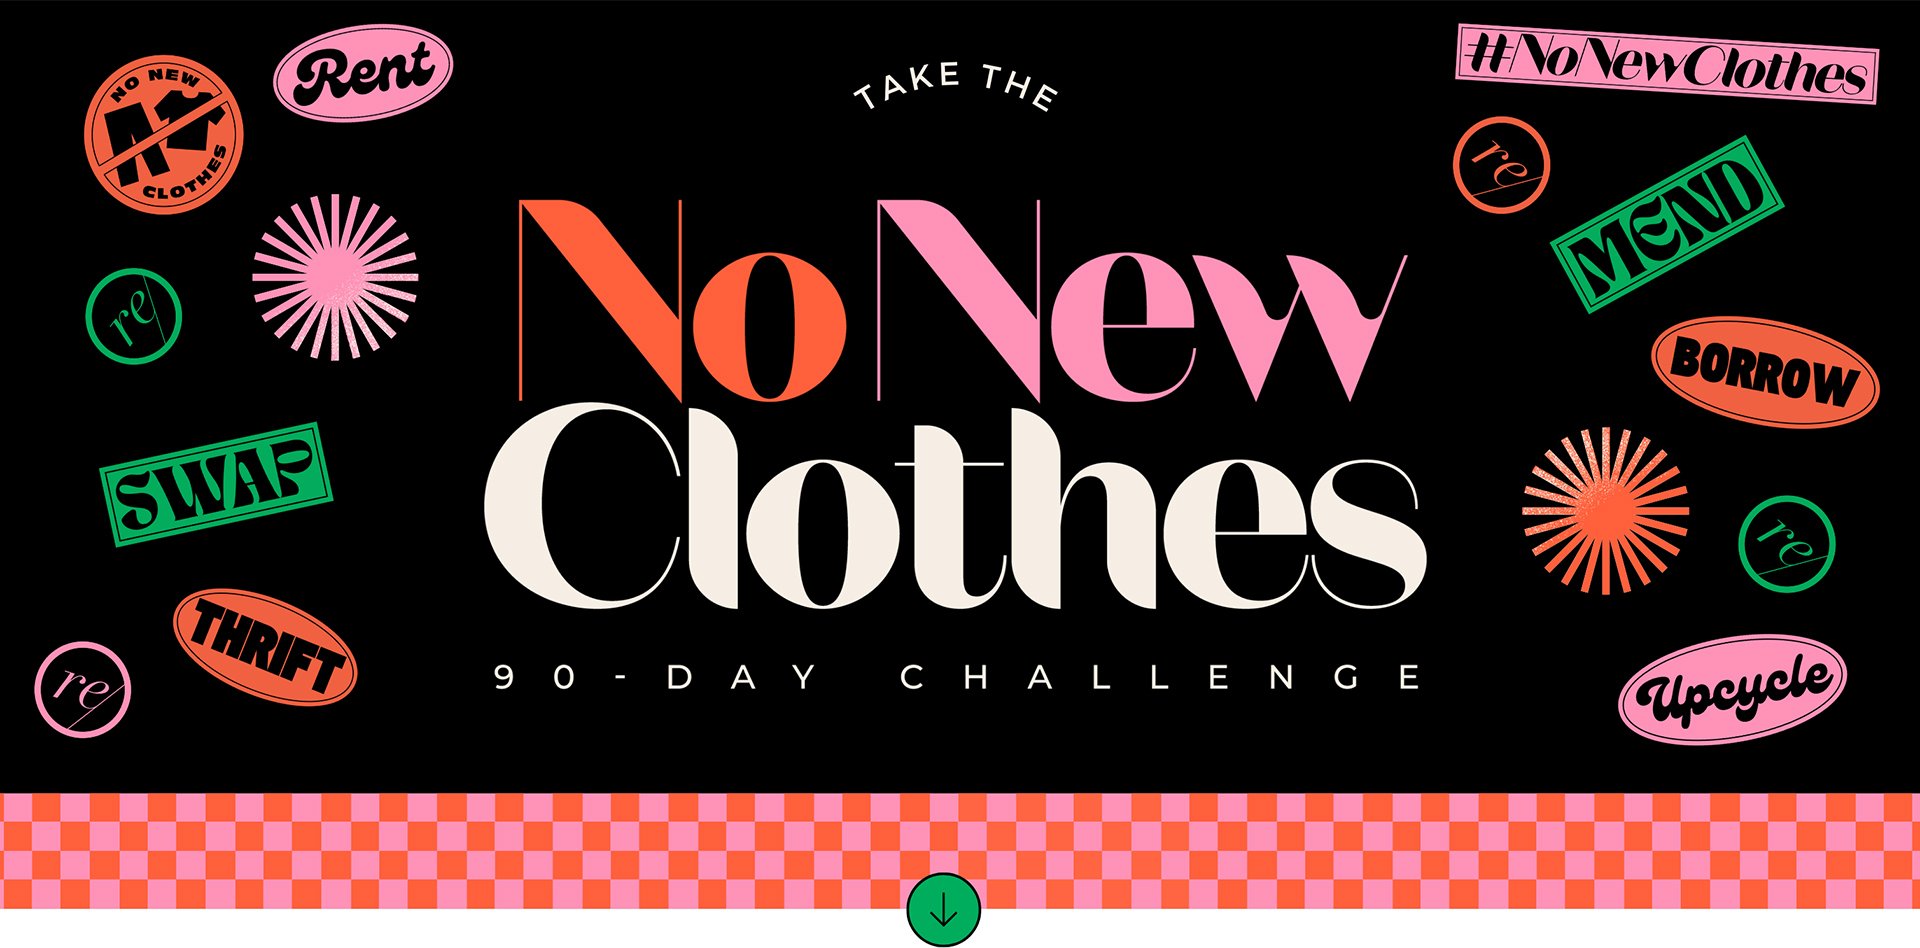 Press Conference: Climate x Worker Rights | Remake | #NoNewClothes Challenge